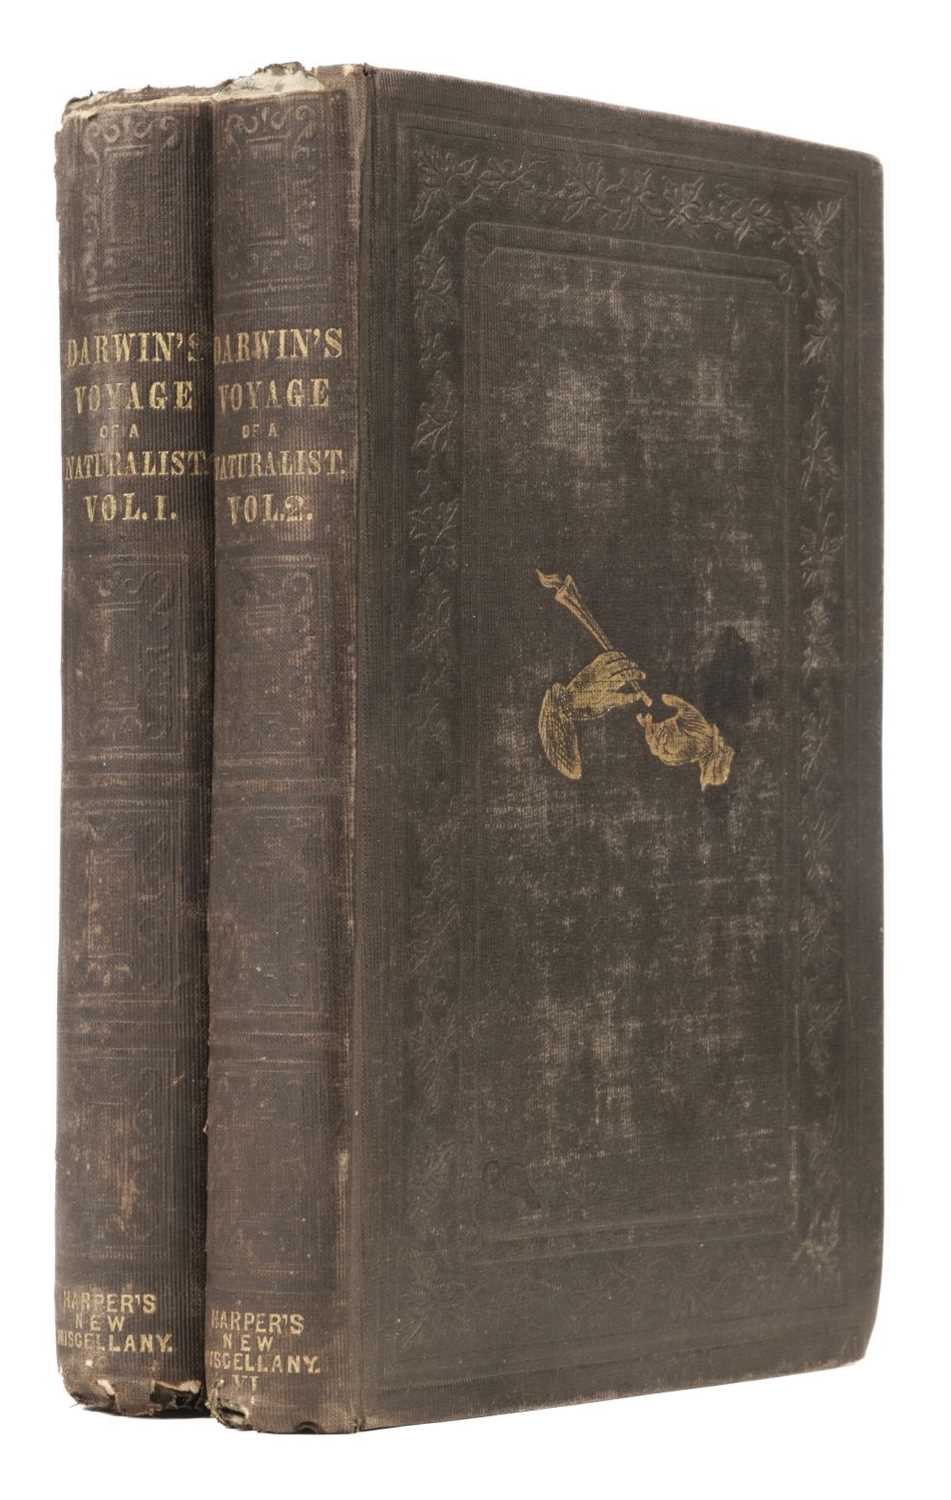 Lot 56 - Darwin (Charles). Journal of Researches, 2 volumes, 1st US edition, 1846